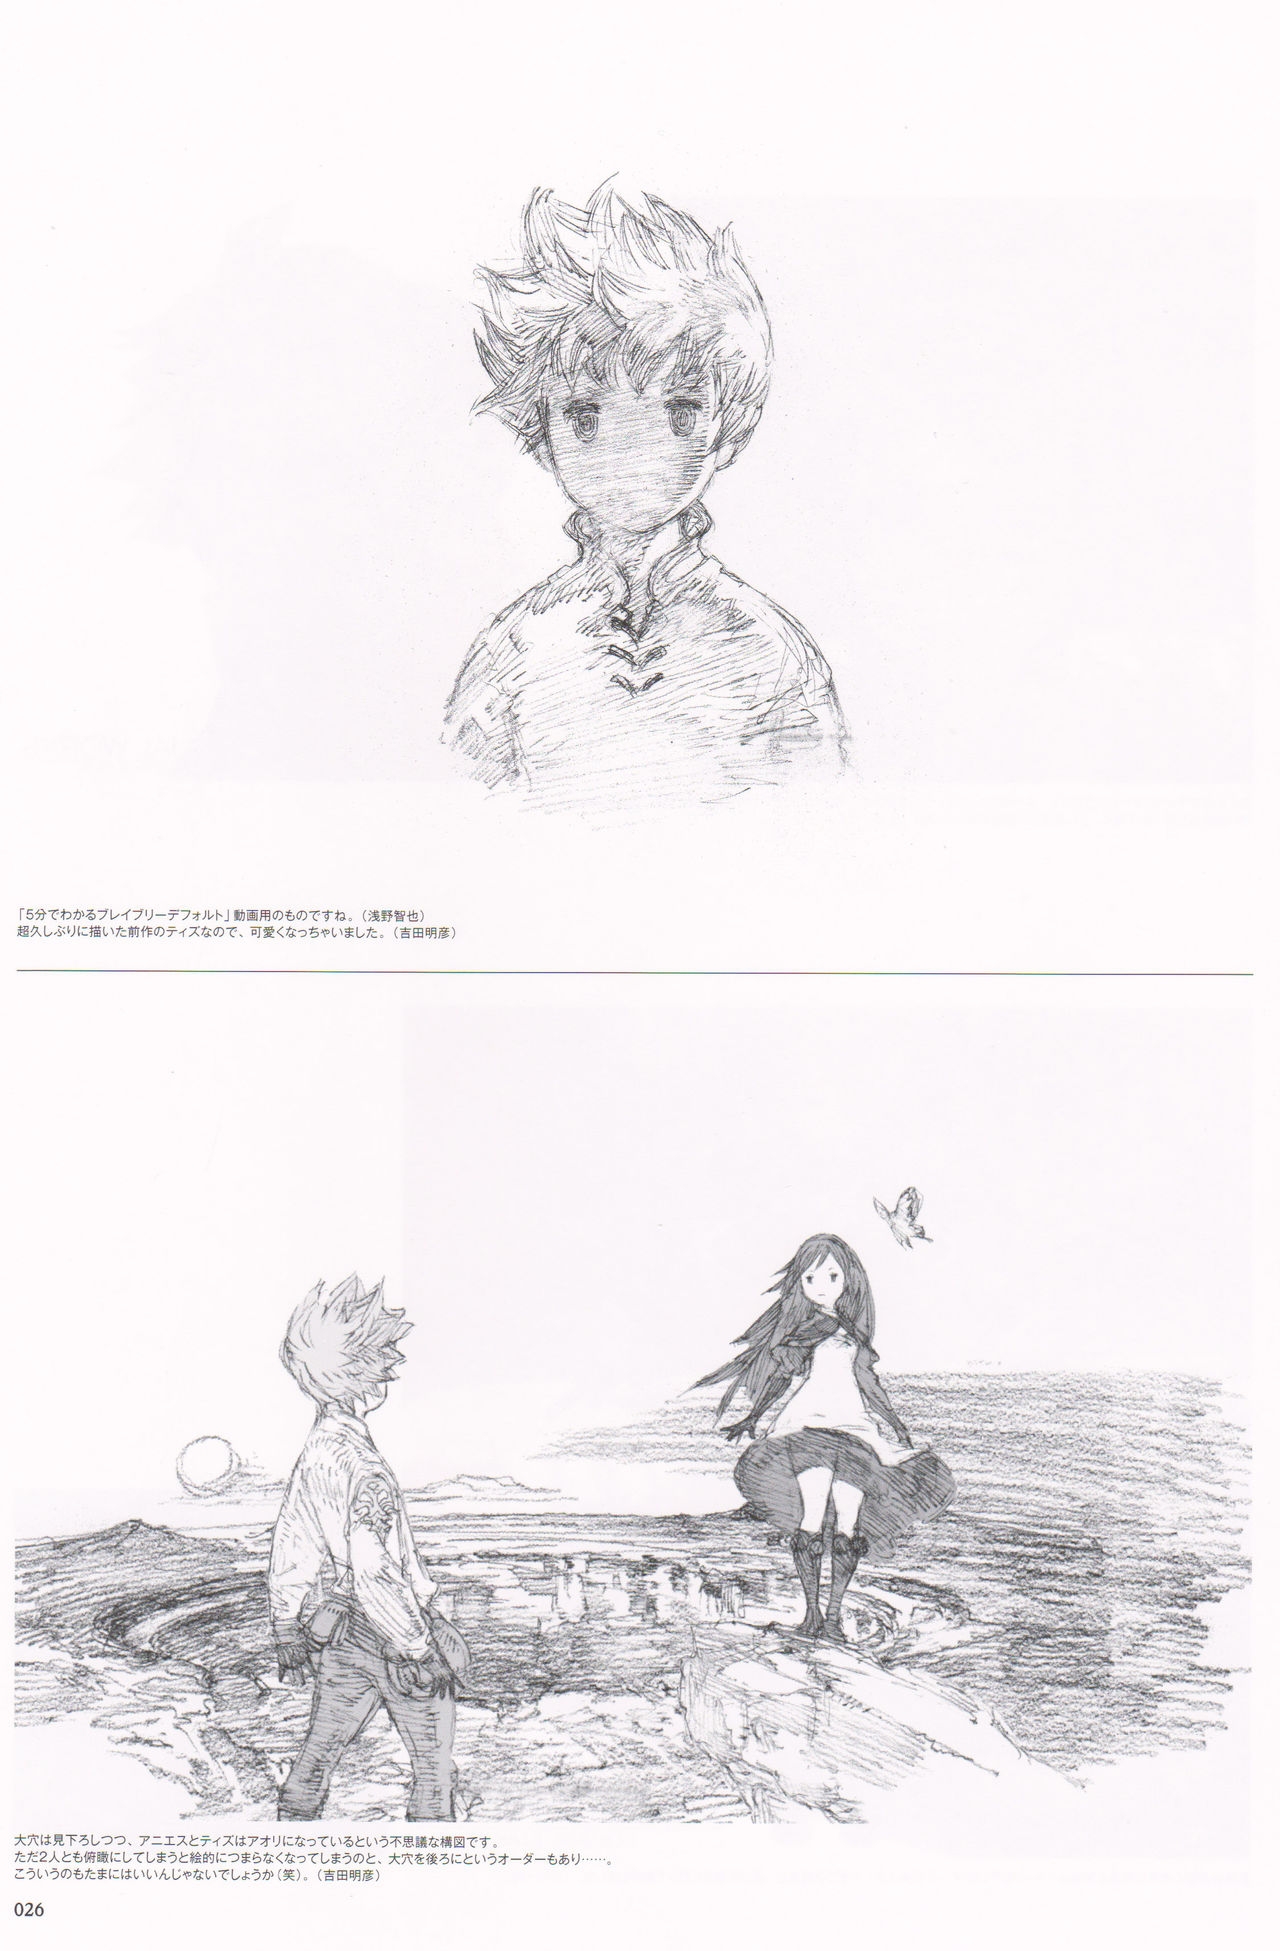 Bravely Second - End Layer - Design Works THE ART OF BRAVELY 2013-2015 26